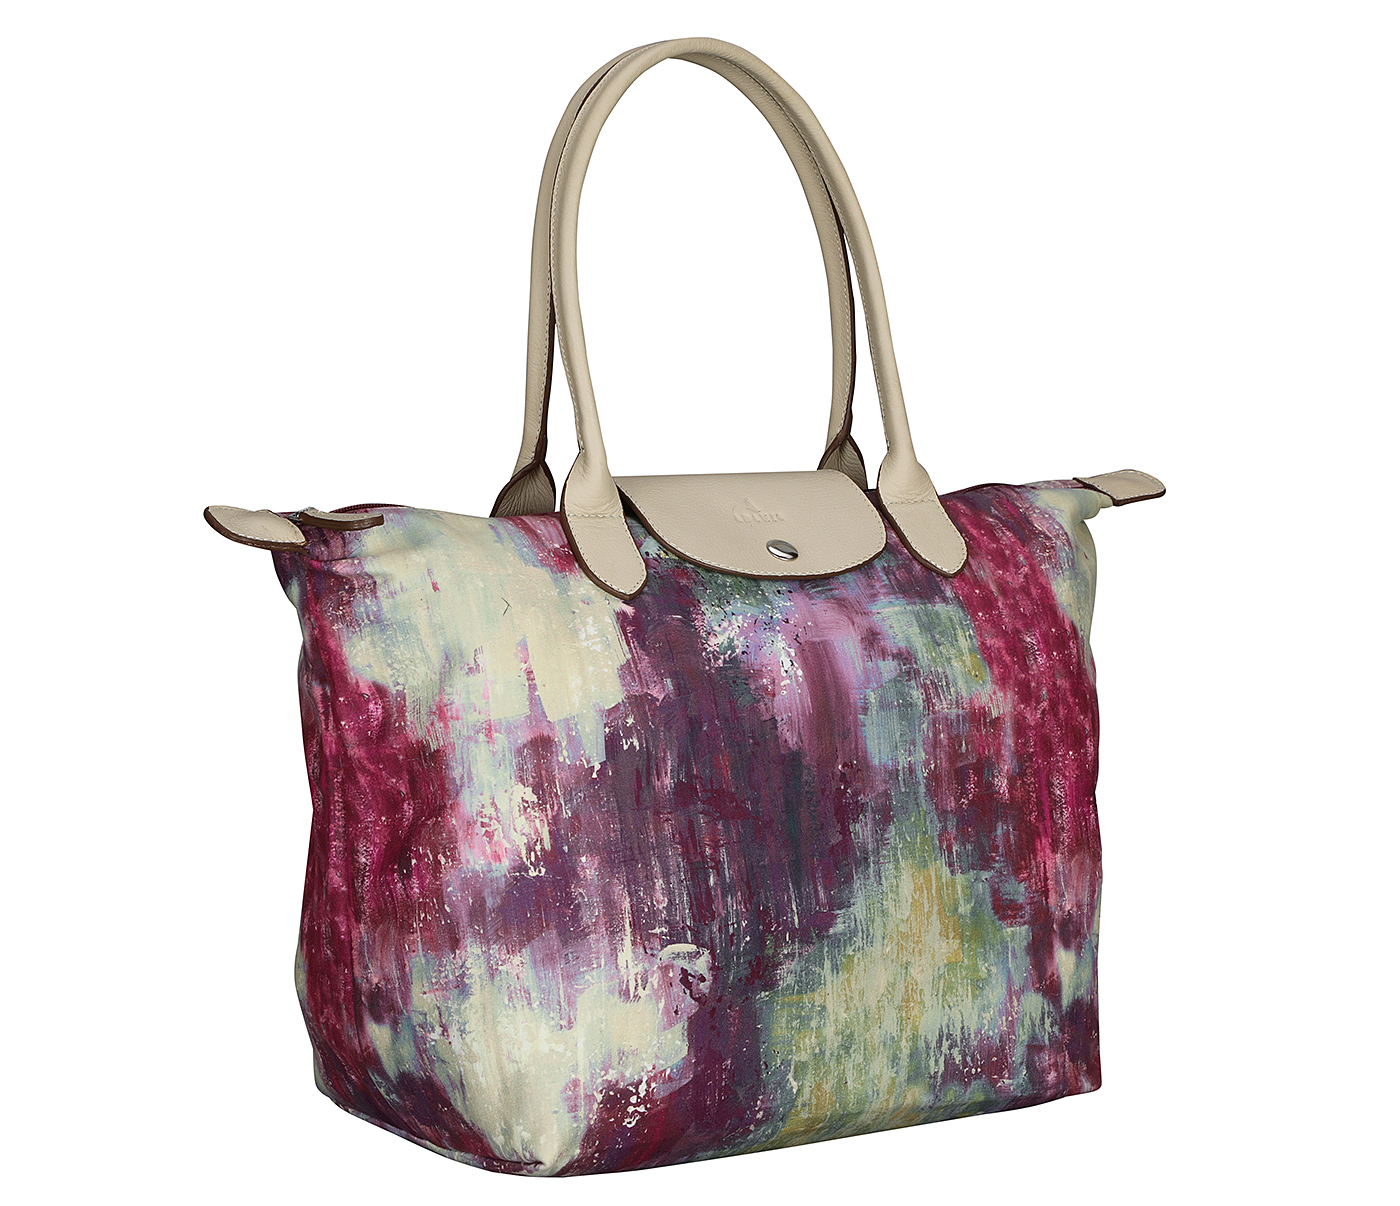 B882--Adelina Folding tote  in leaf print material with genuine leather handles and flap - Wine